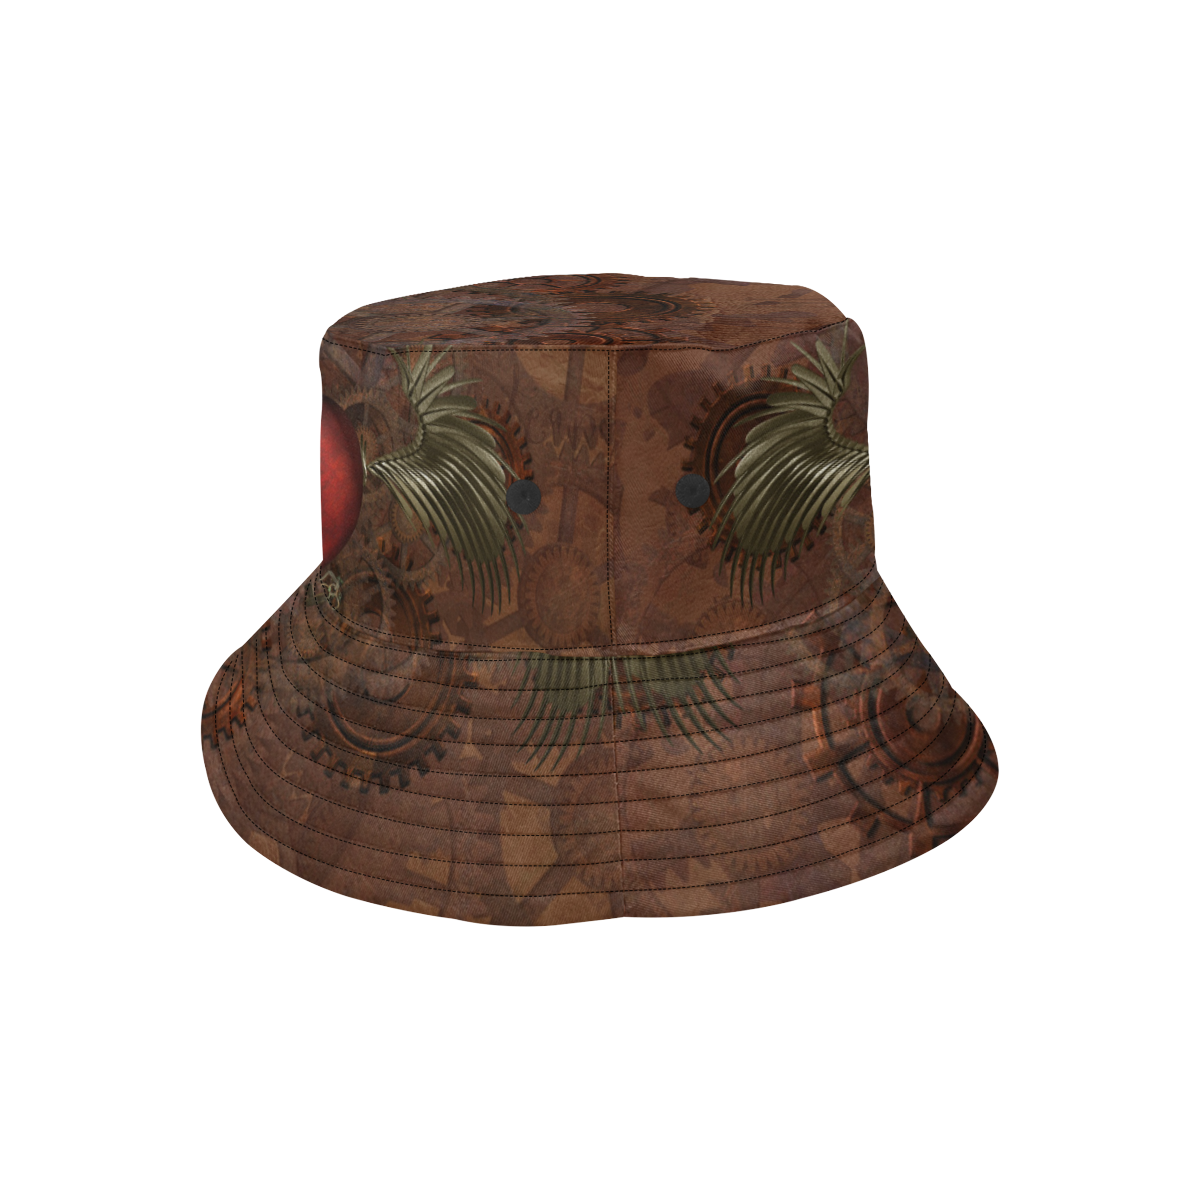 Awesome Steampunk Heart With Wings All Over Print Bucket Hat